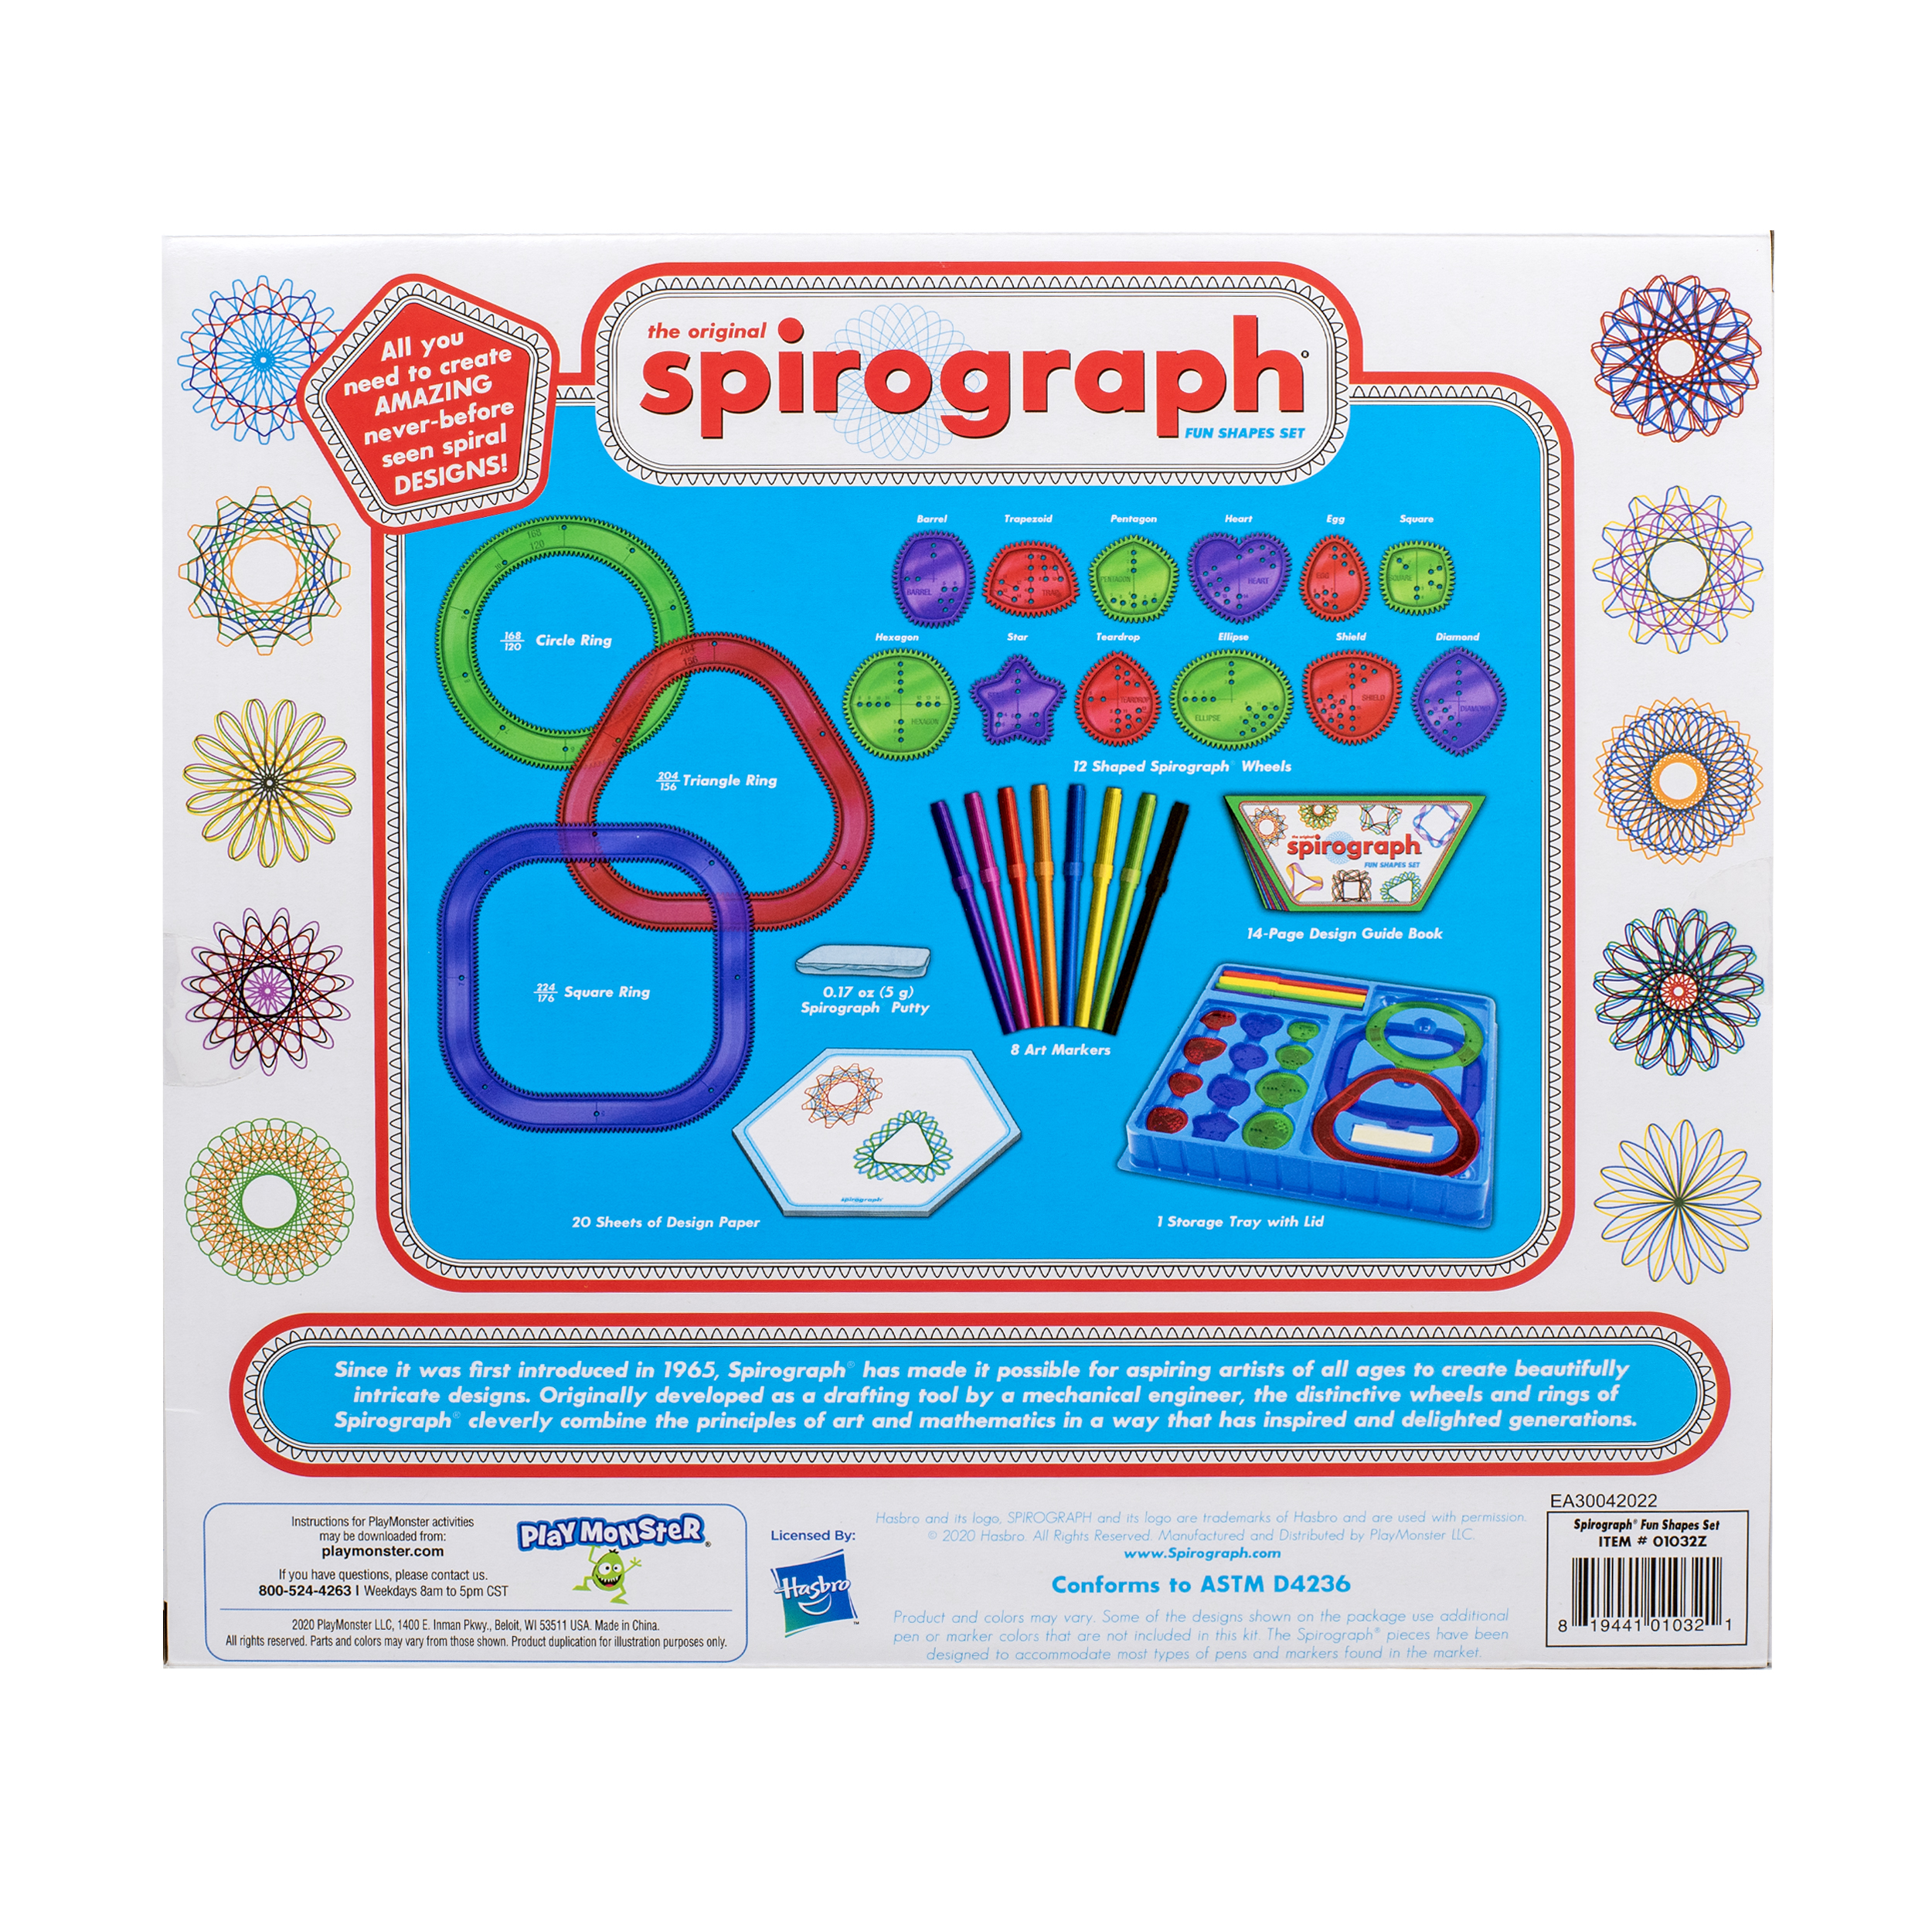 Original Spirograph - Toys for Tots Virtual Toy Box